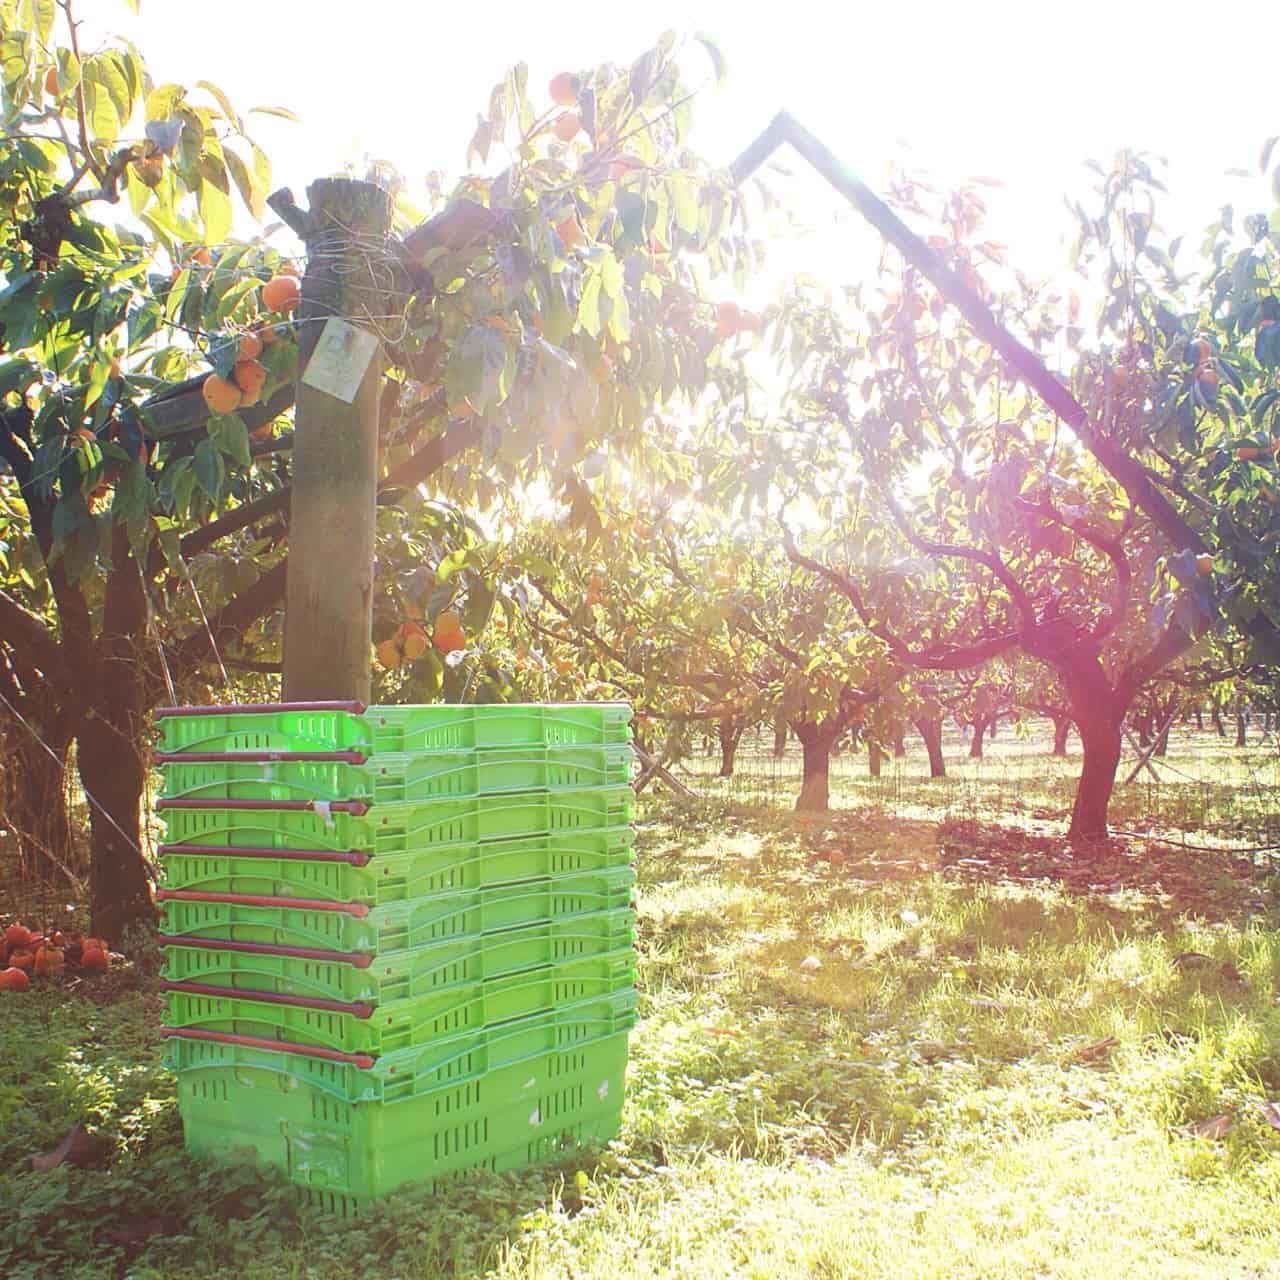 This large, commercial persimmon orchard (The Persimmon Patch on Kerikeri Road) sells directly to the public, via an honesty box system. You have to drive all the way through the beautiful orchard to get to the farm stall.